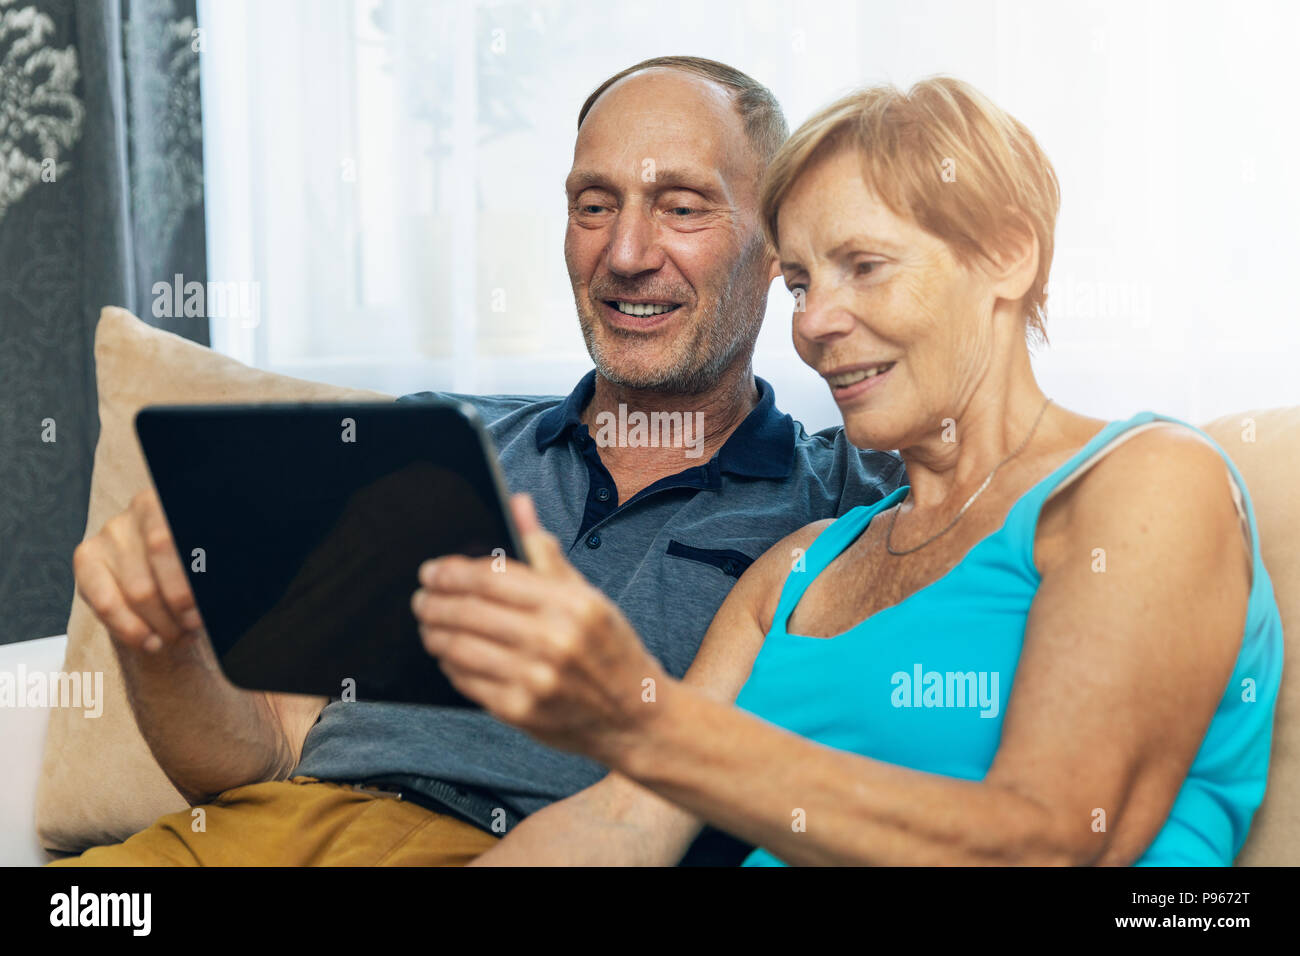 happy senior couple sitting on couch and using digital tablet at home Stock Photo